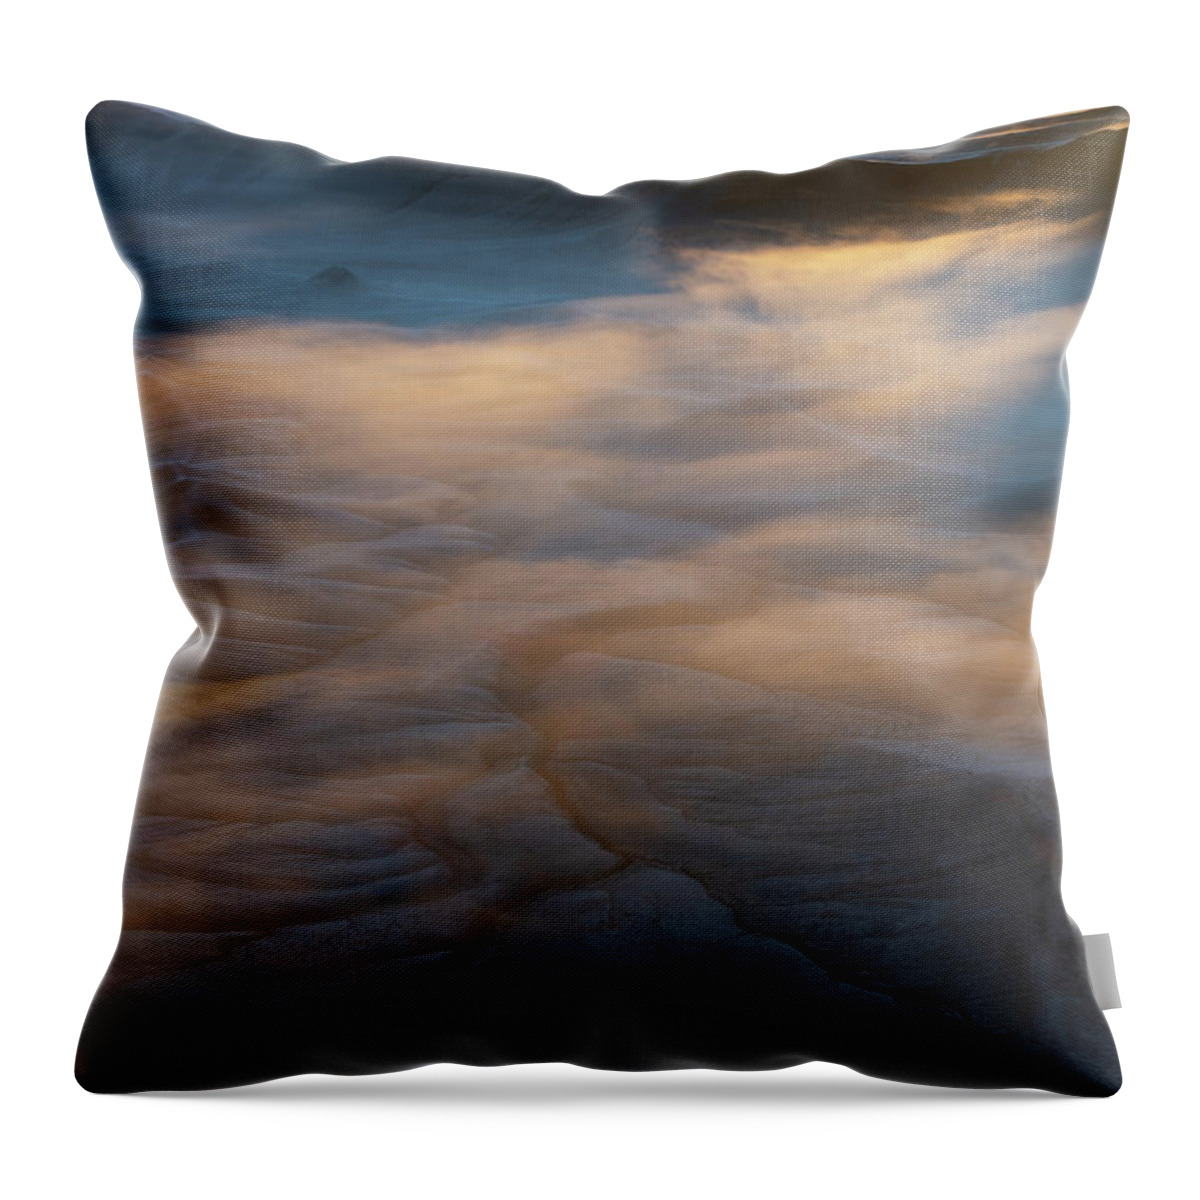 Fog Throw Pillow featuring the photograph Ethereal by Dustin LeFevre